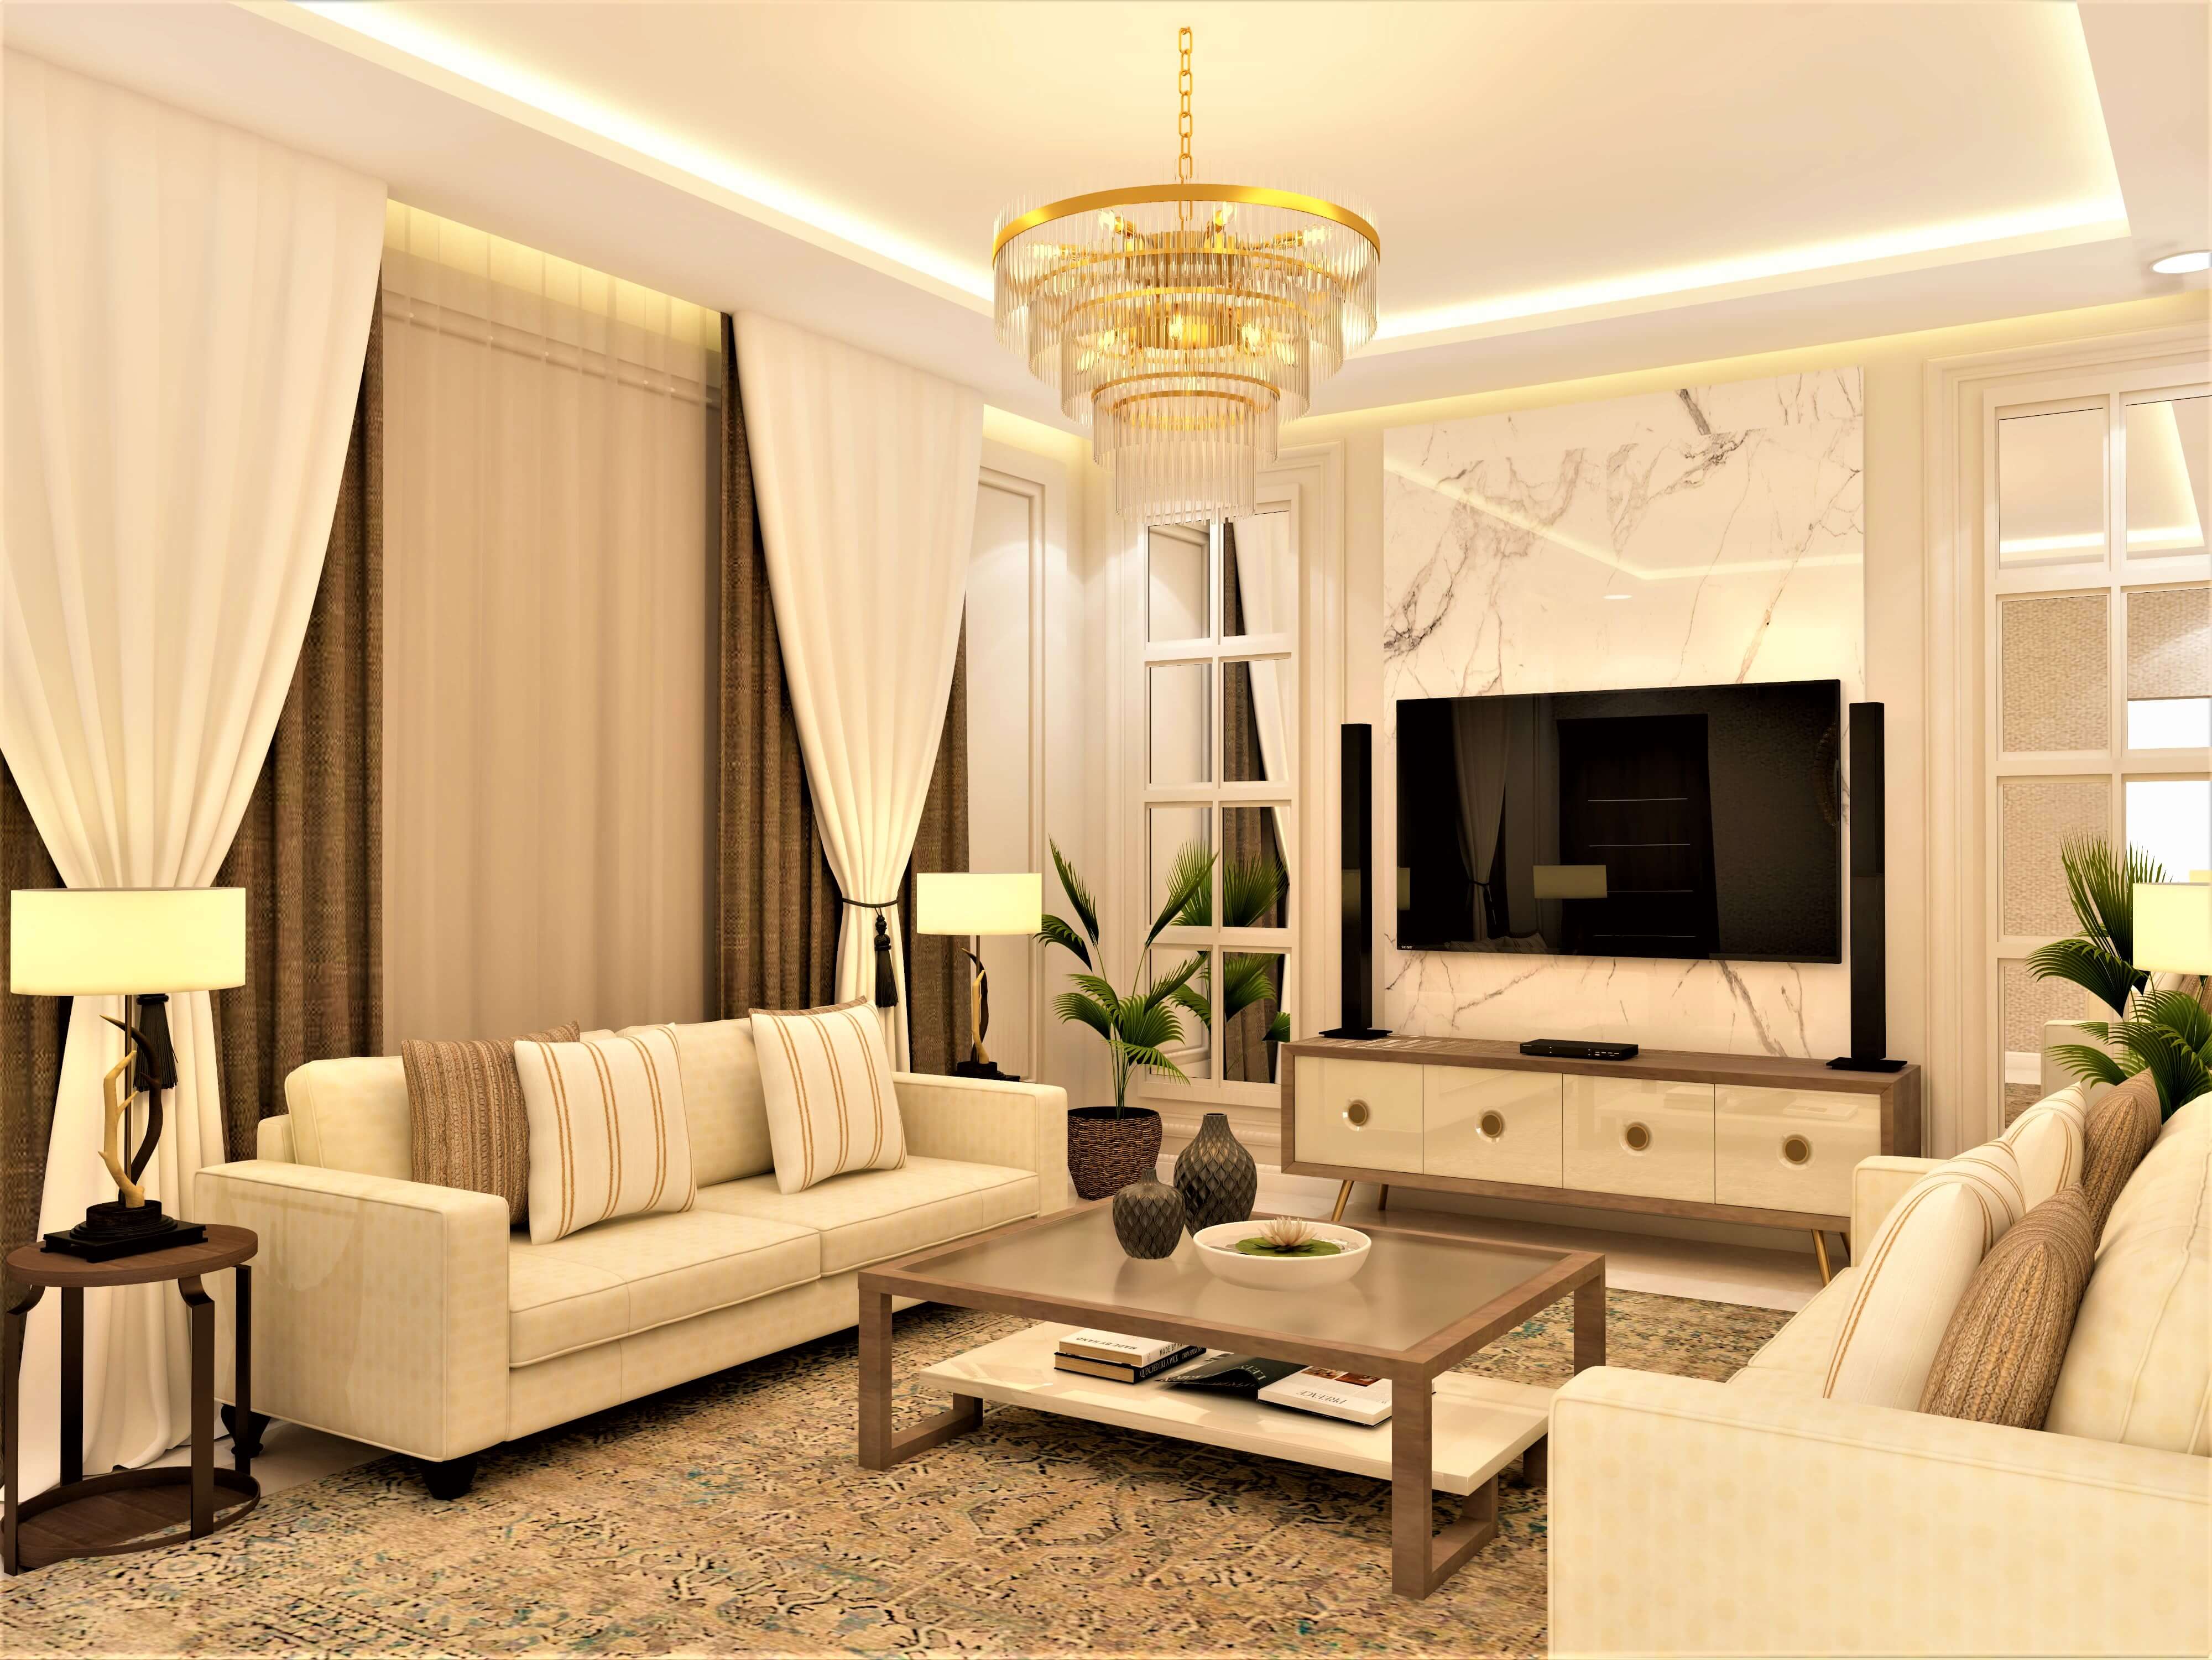 Classic living room design with a touch of gold - Beautiful Homes